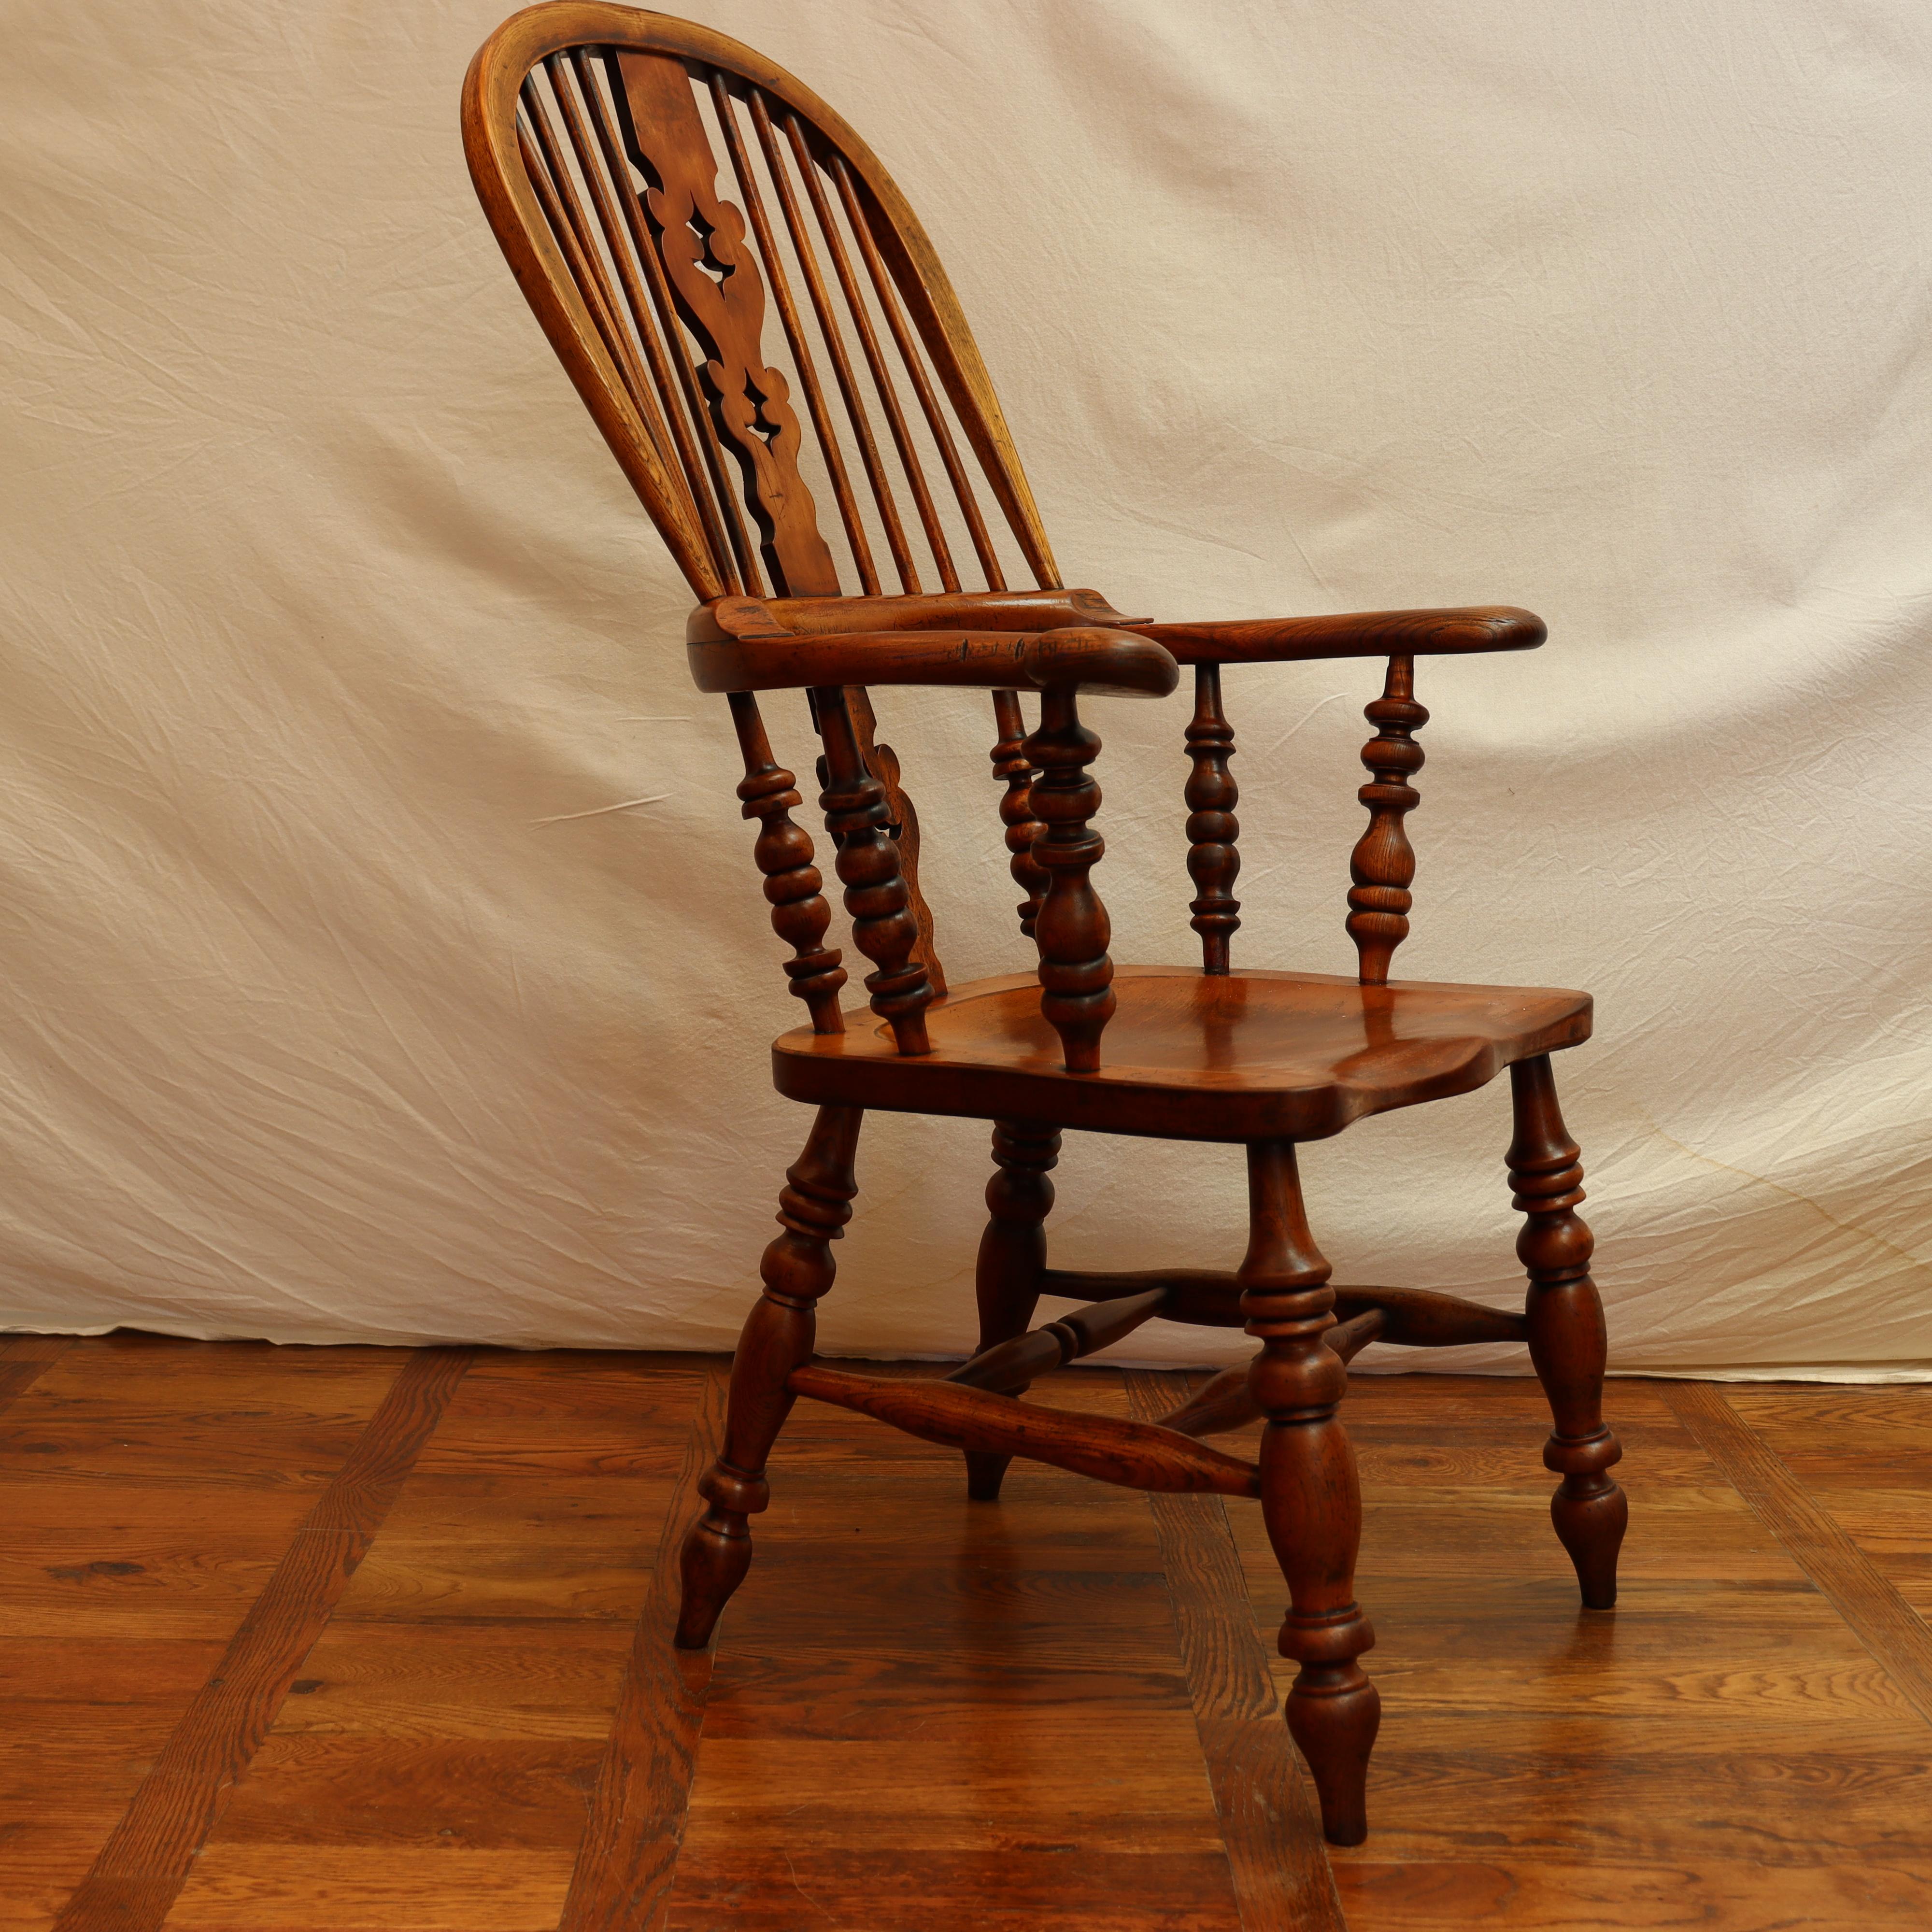 British Antique Early 18th Century Yew Wood & Elm English Fiddleback Windsor Armchair For Sale